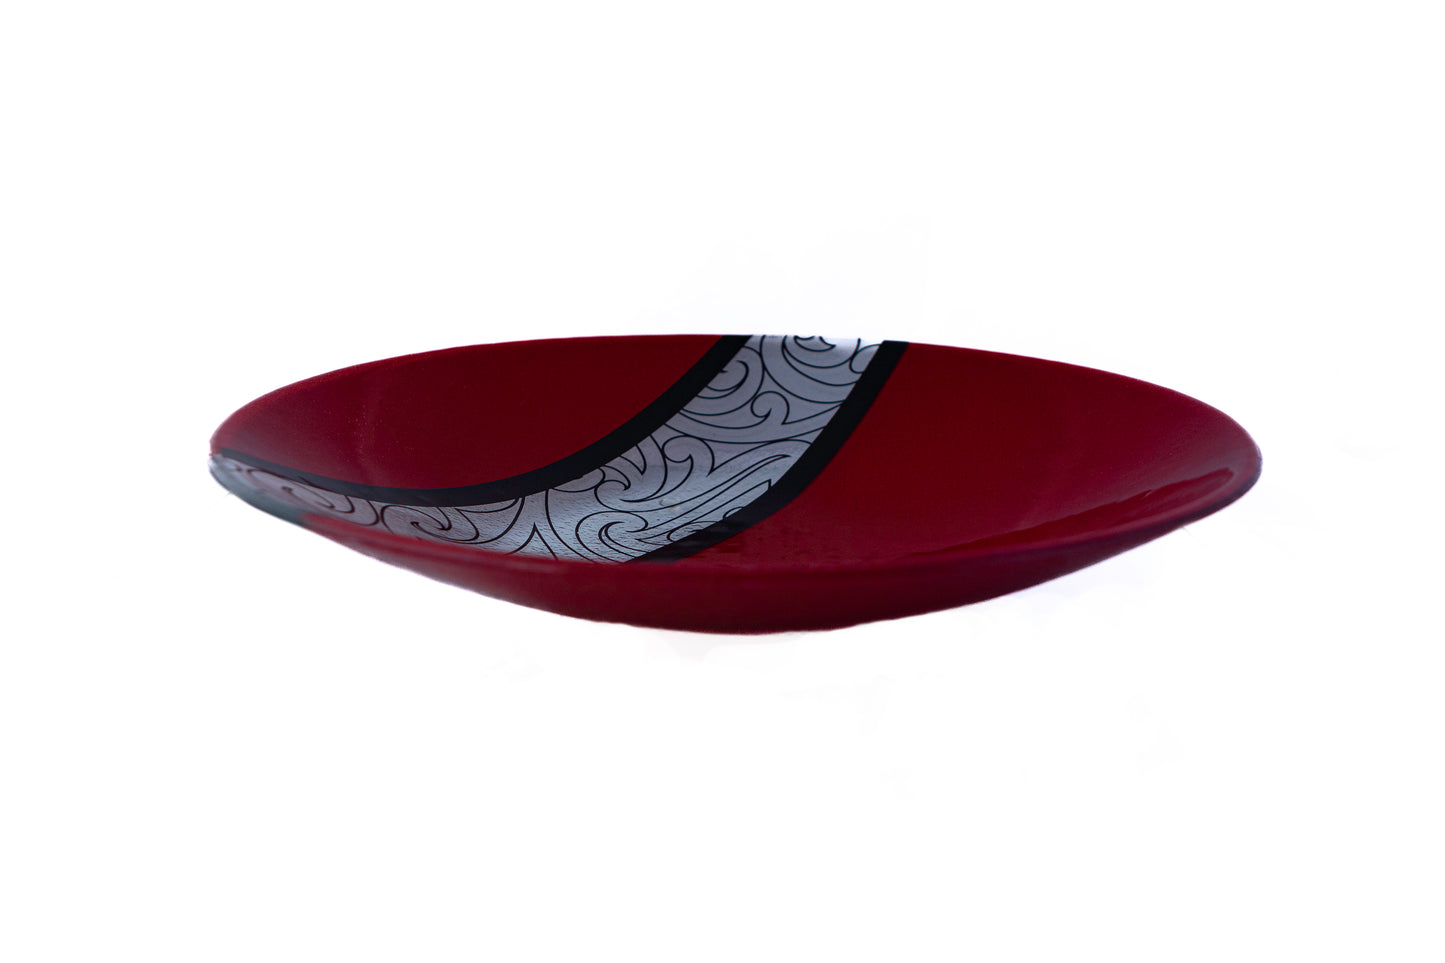 top/side view of Fused Glass Bowl by Maori Boy Glassware Rongo Design (red and black) Silver Fern Gallery